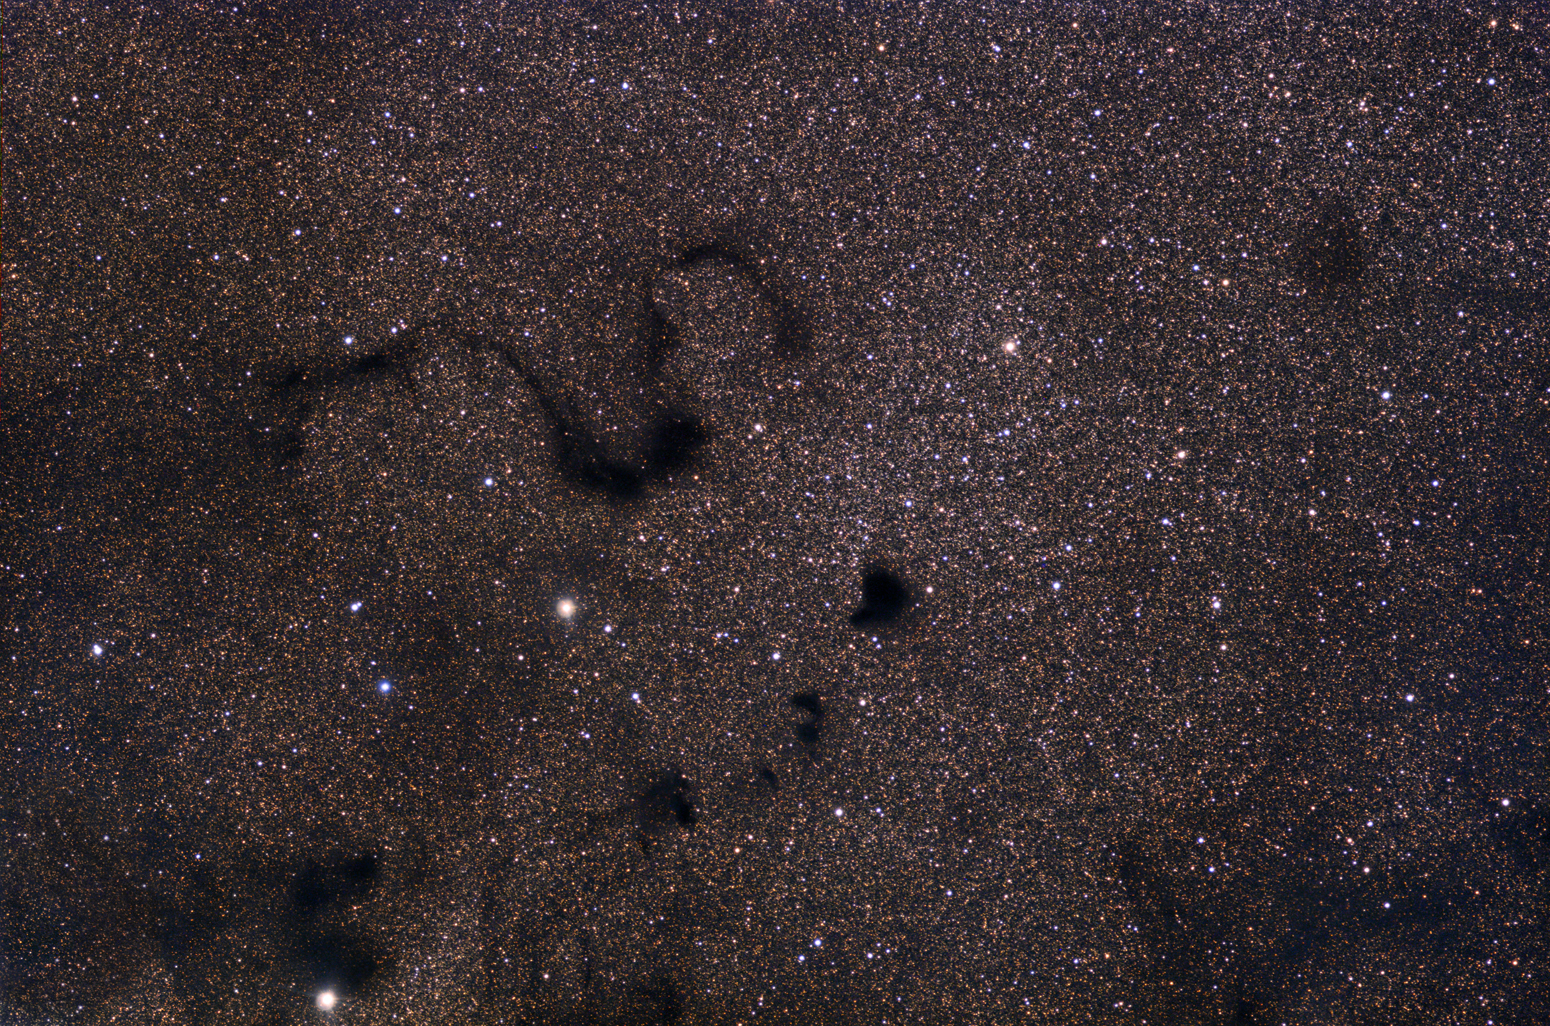 B72 and holes in the Milky Way